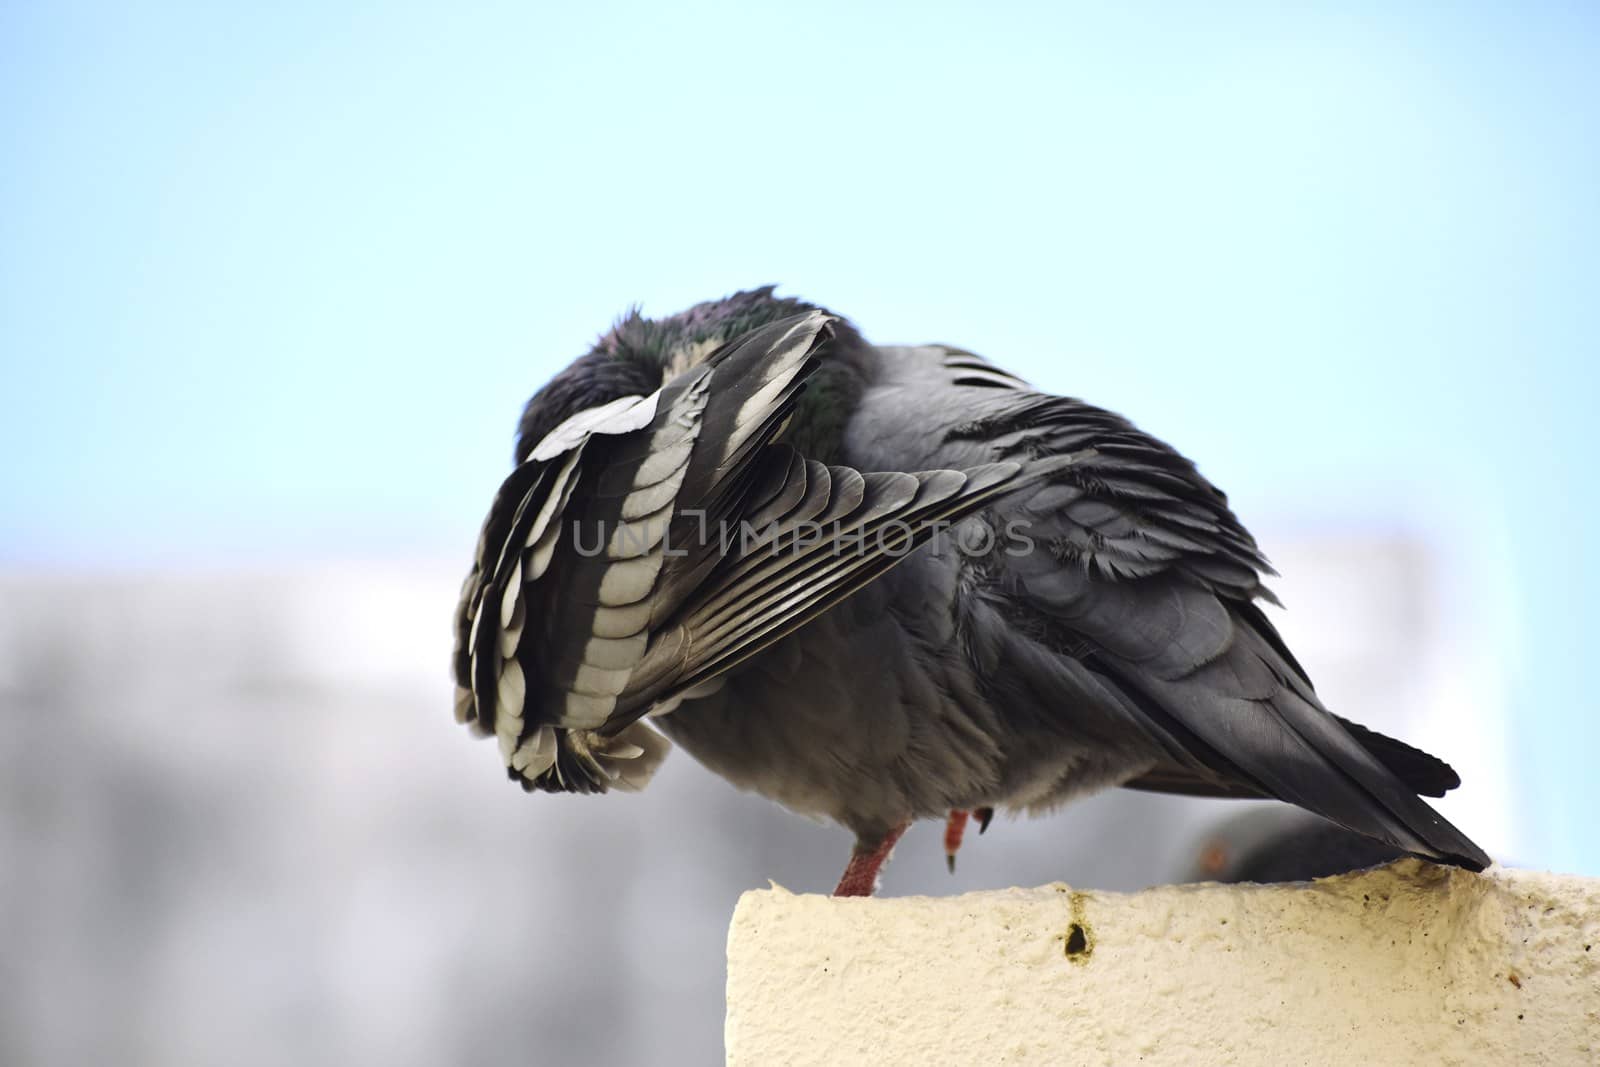 A pigeon siting on wall of my roof by ravindrabhu165165@gmail.com